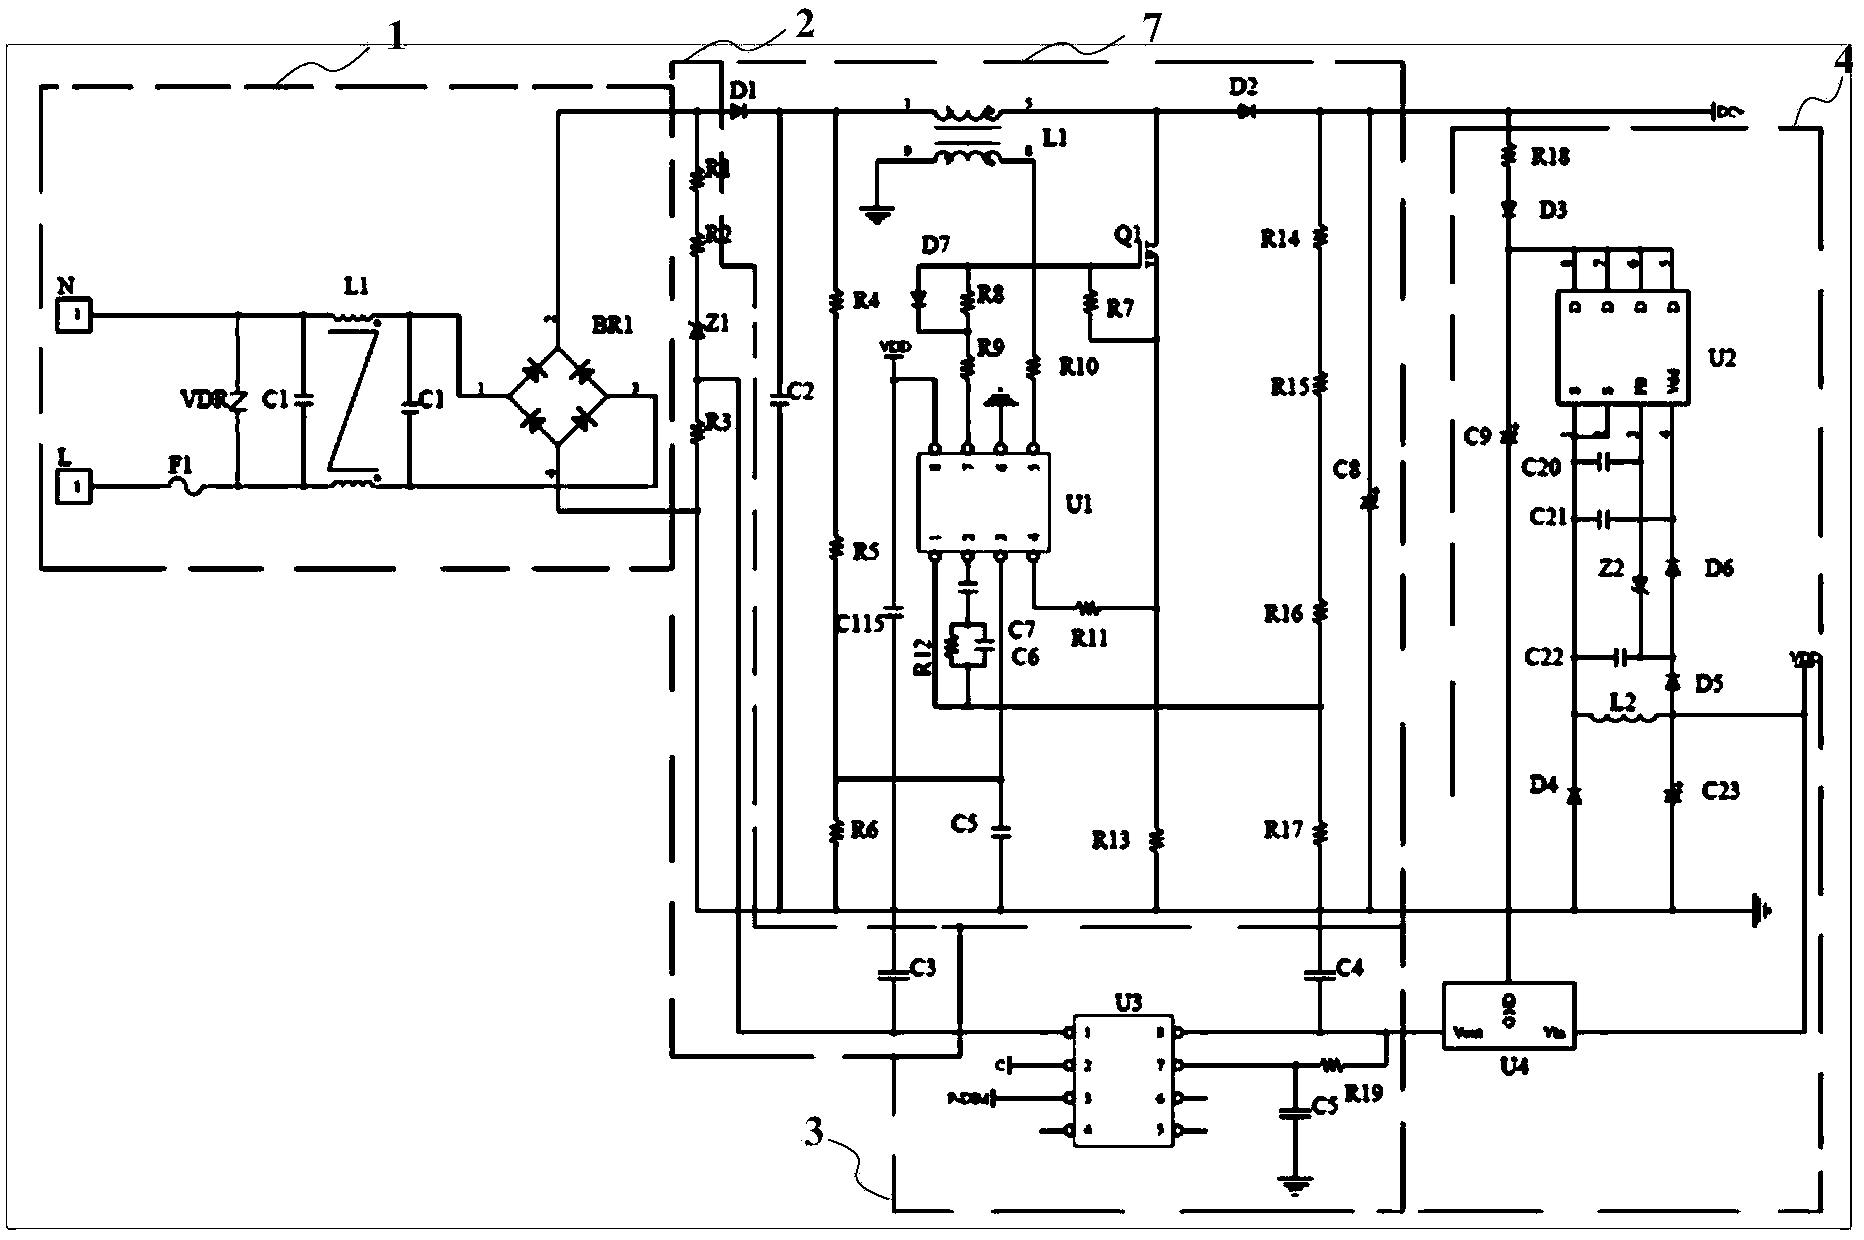 Switching and dimming LED driving circuit